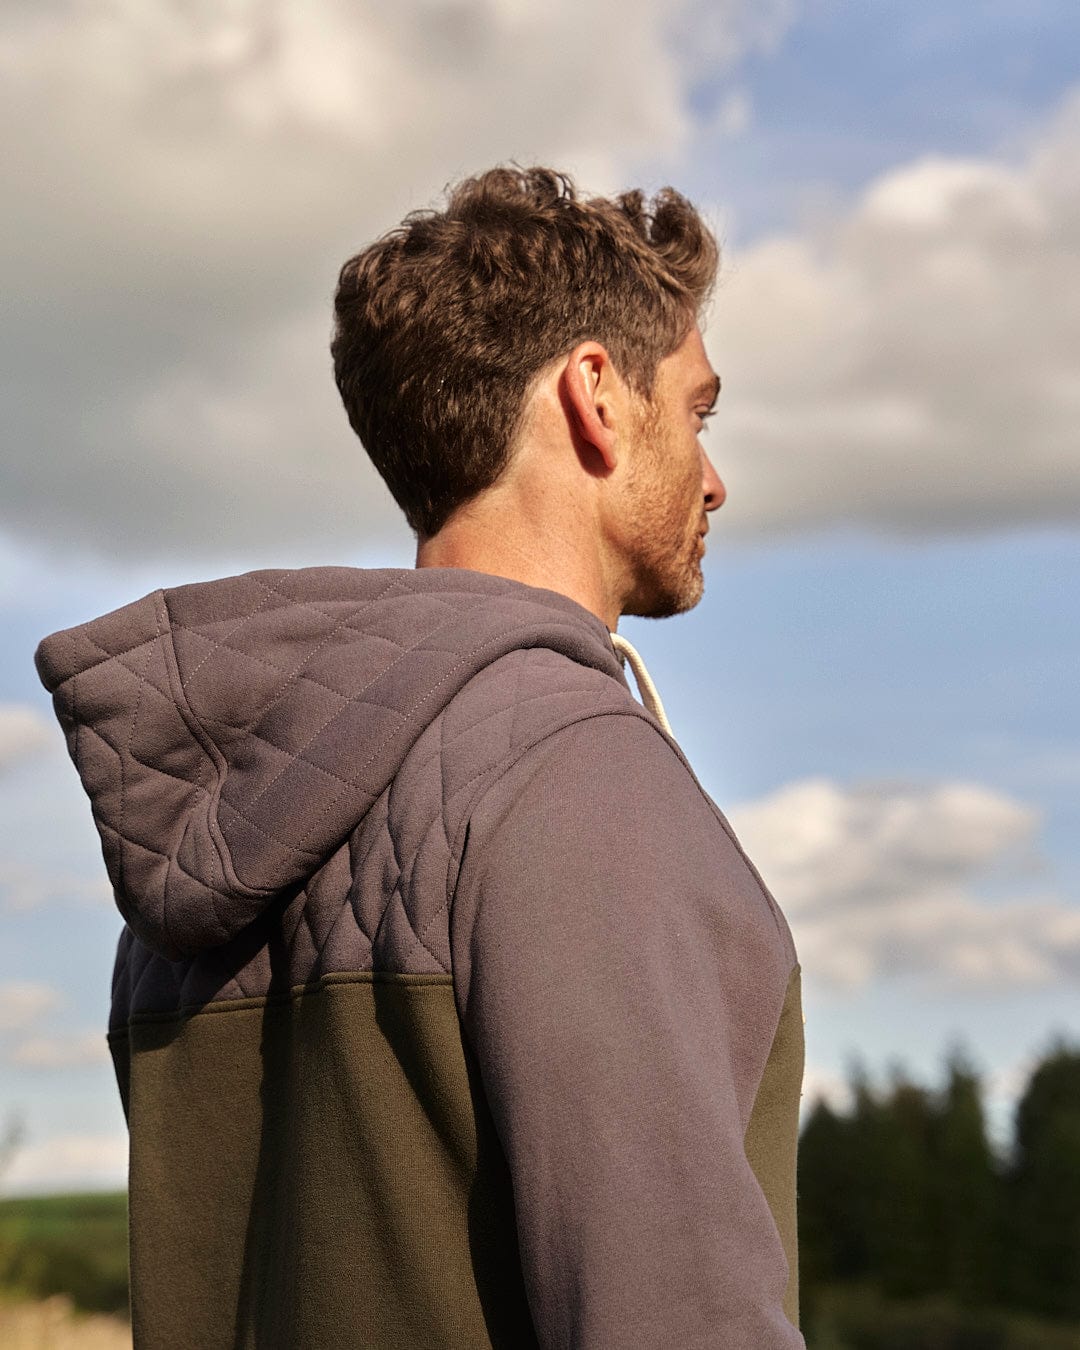 A man in a Saltrock hoodie feeling warmth and comfort while looking out over a field wearing the Aiken - Mens 1/4 Neck Hoodie - Green.